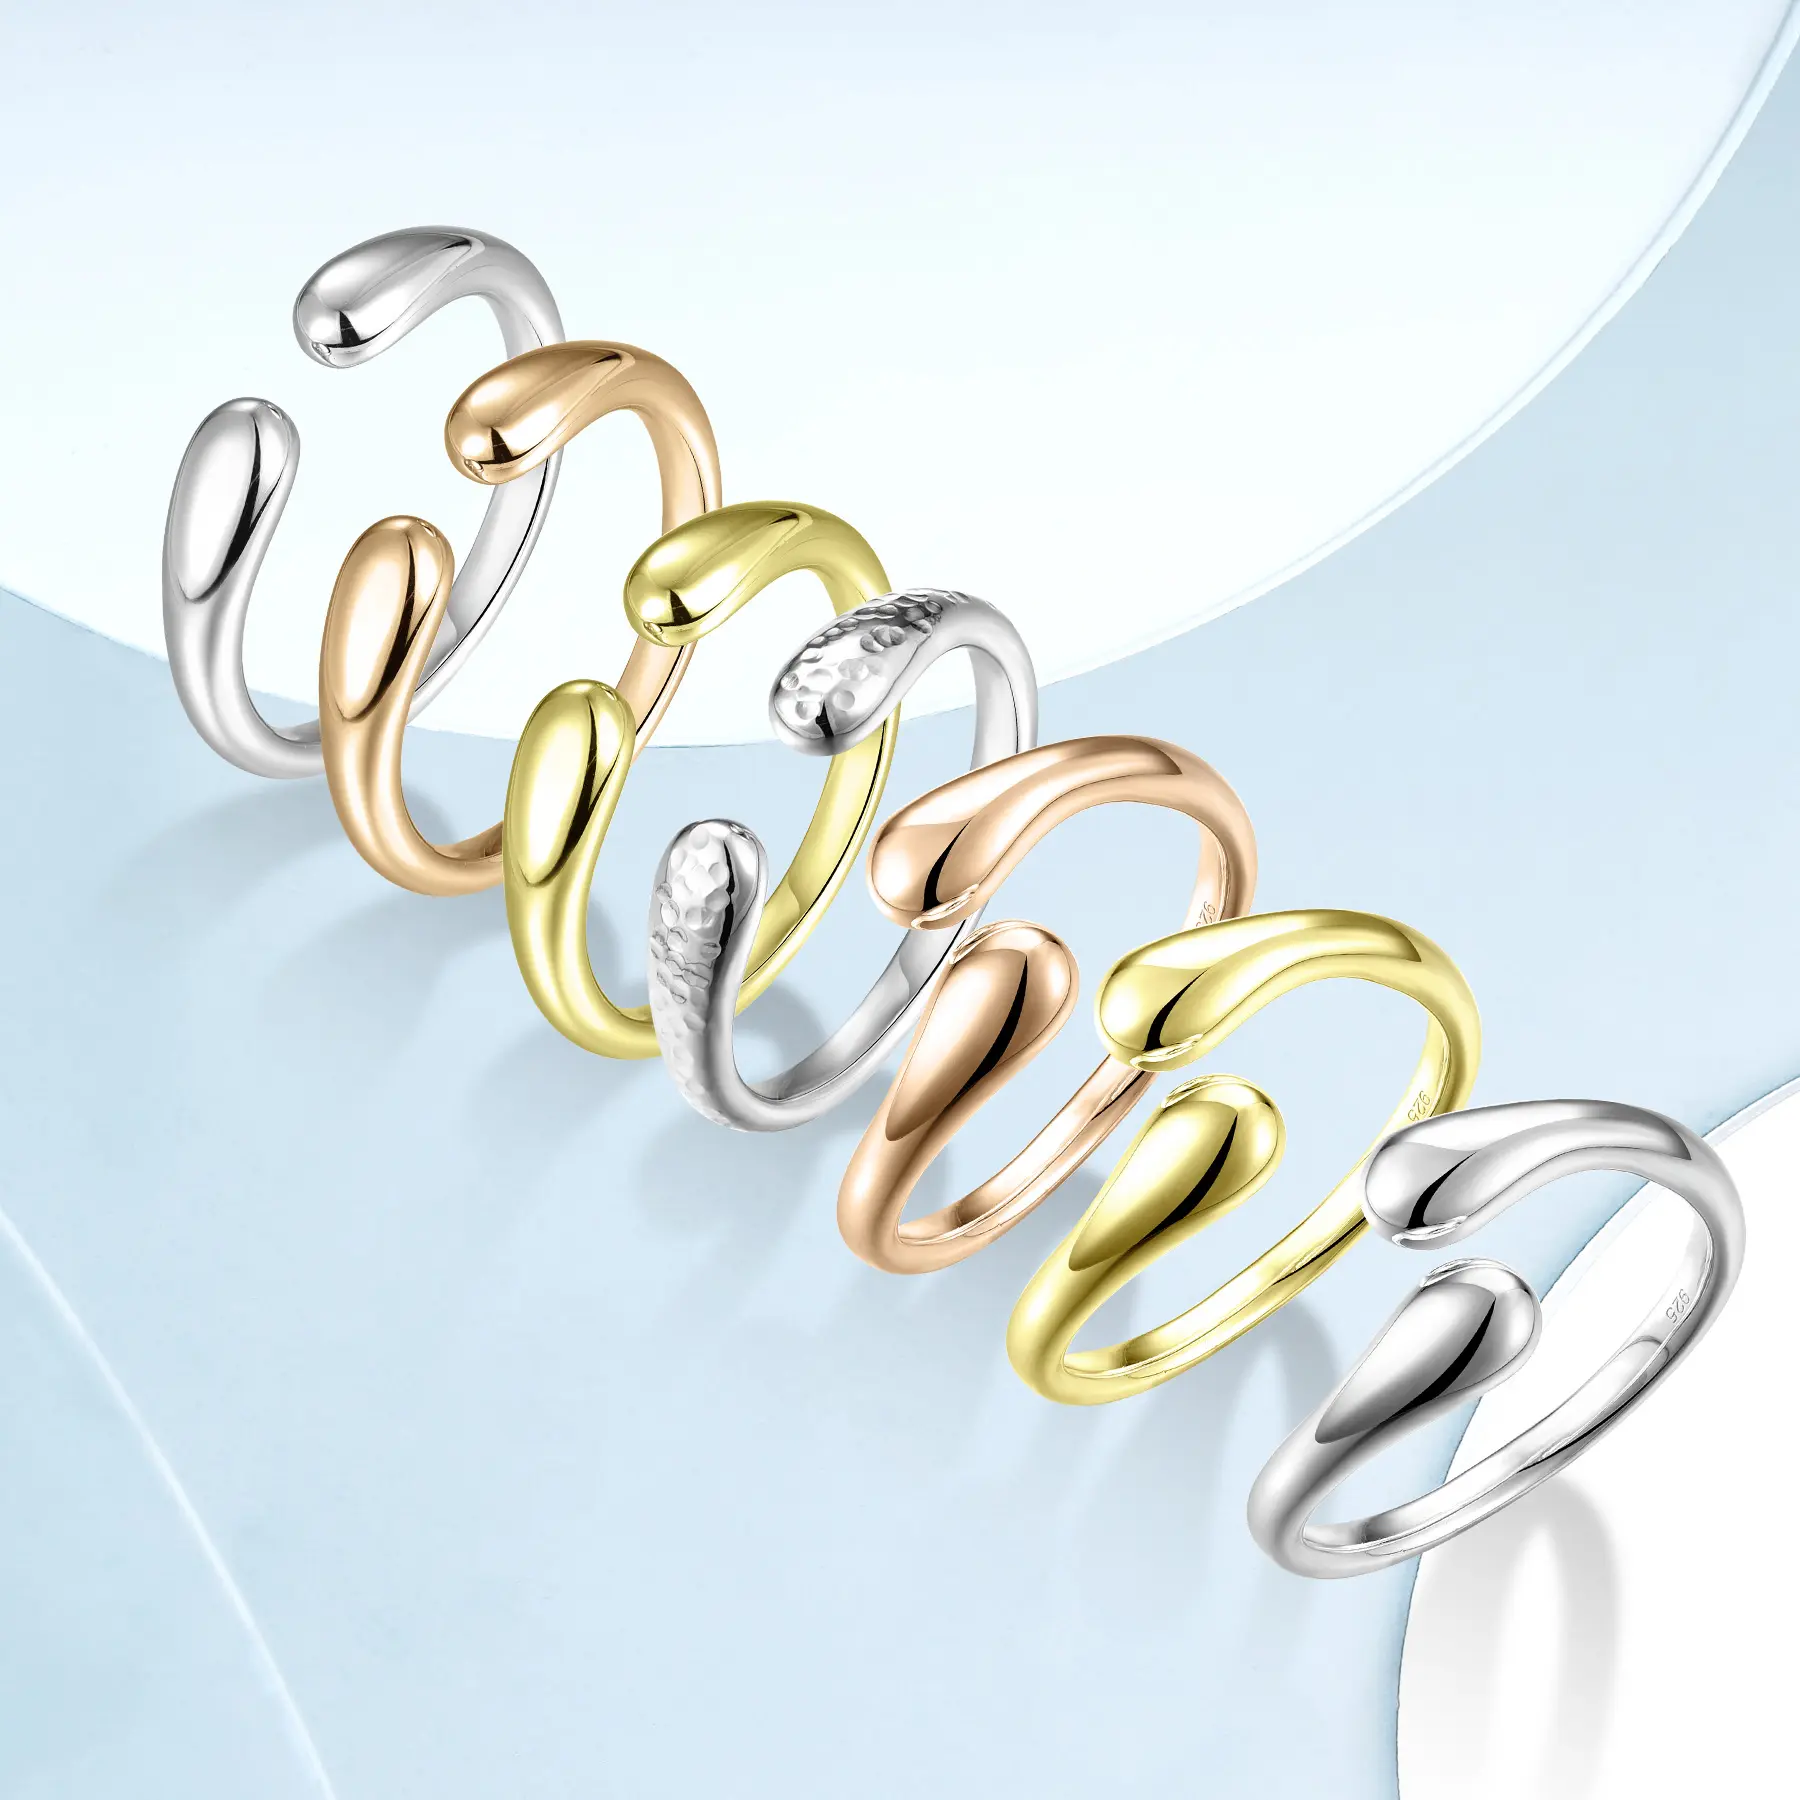 New Collection Minimalist Ring Jewelry 18k Gold Plated Rings Open Adjustable Plain Silver Ring For Women